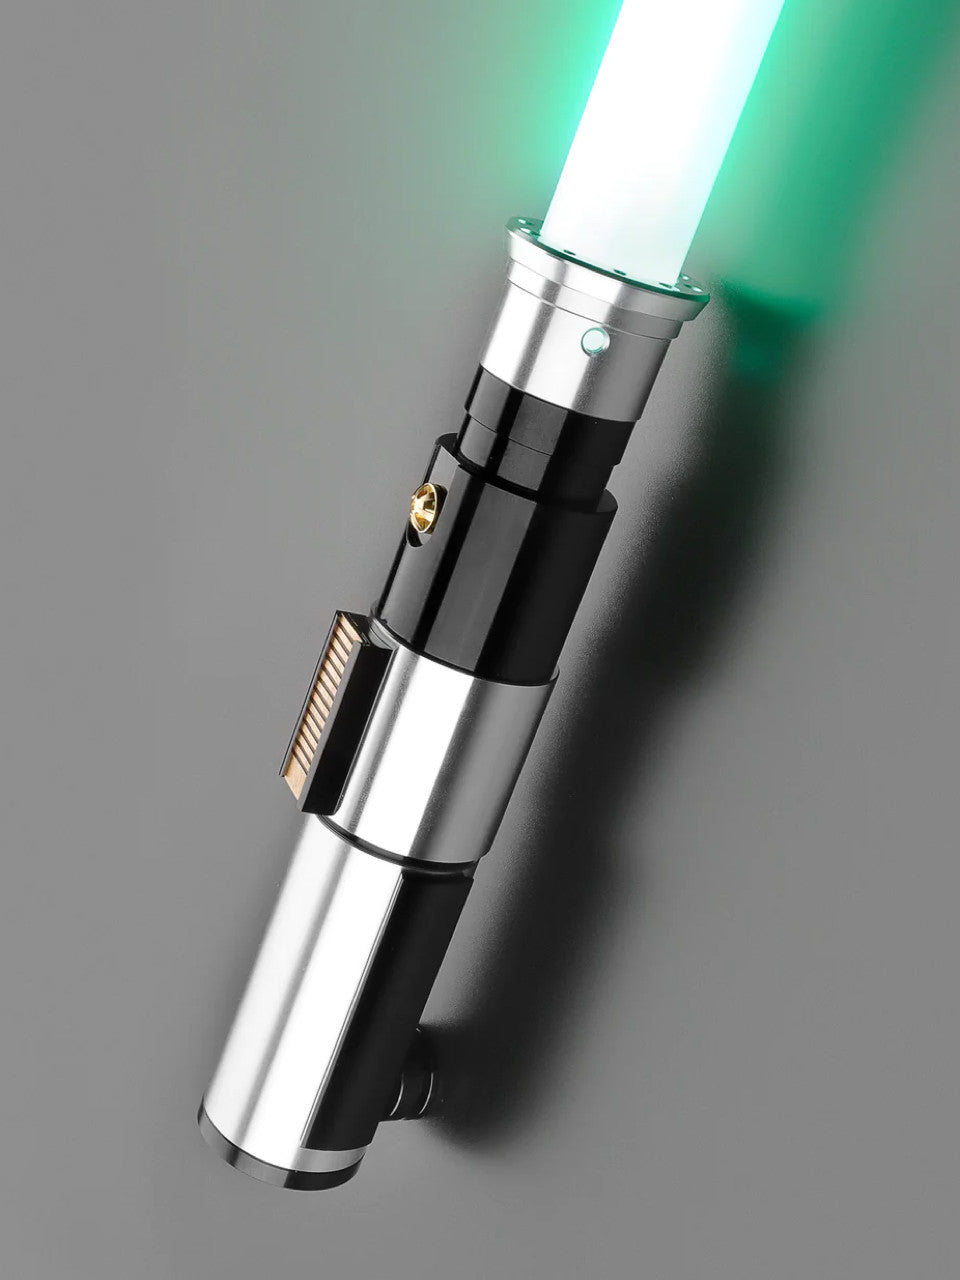 THE PIELL PROTECTOR LIGHTSABER